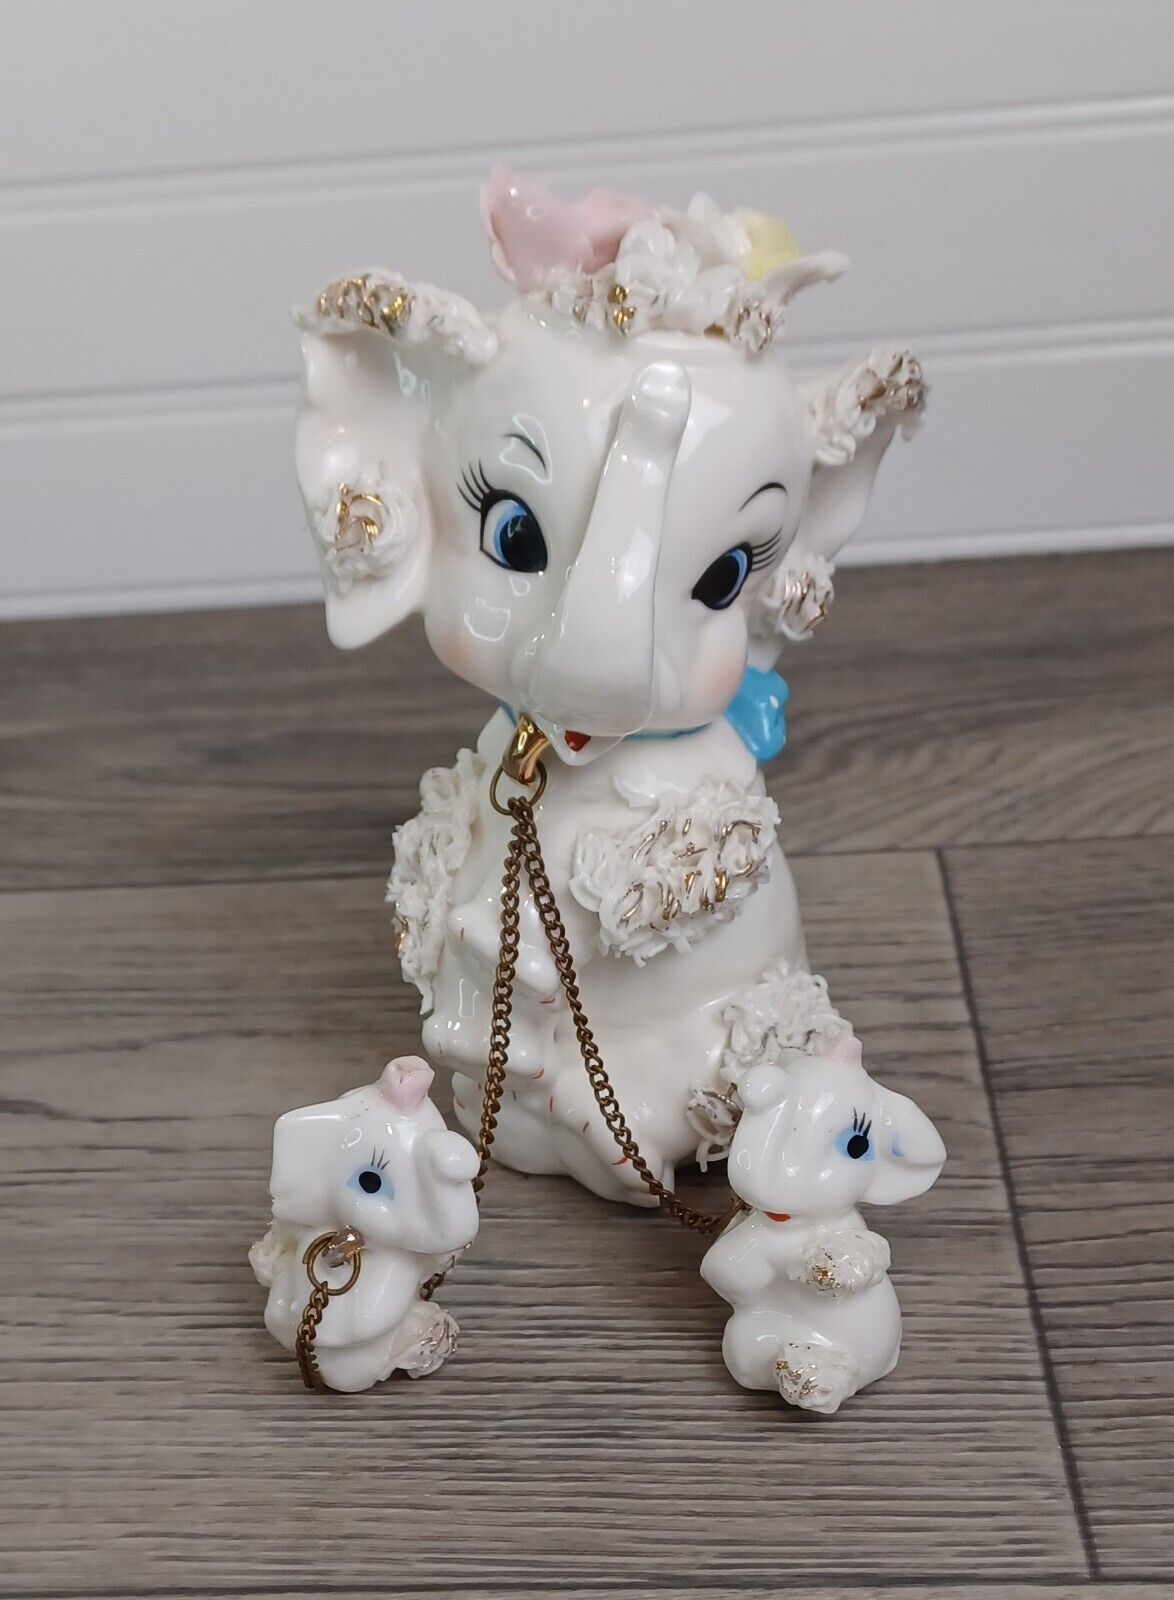 Vintage TILSO, Japan Porcelain Spaghetti Elephant Mother with 2 Babies on Chain